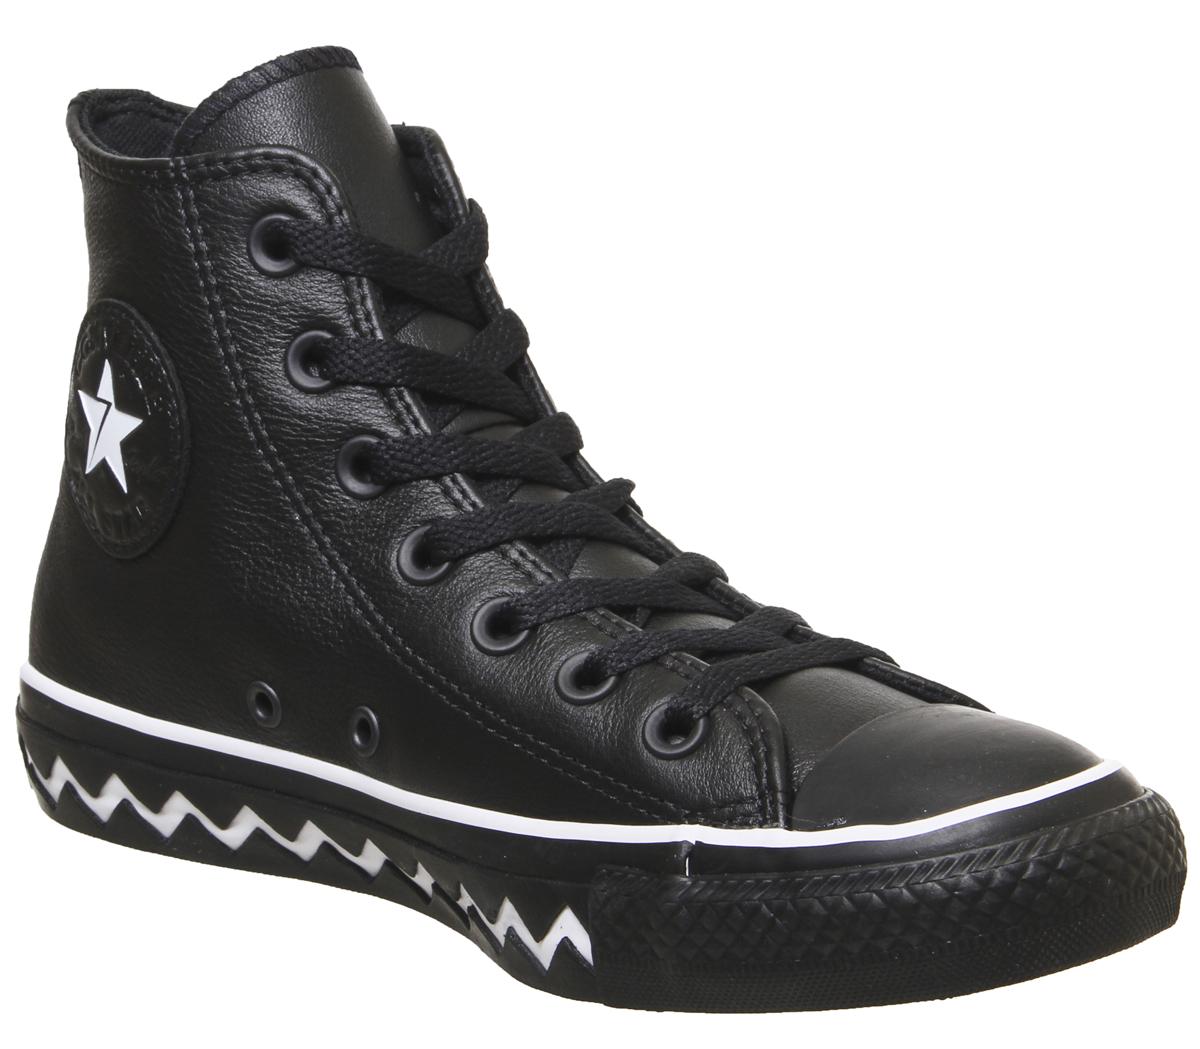 all black converse with white sole